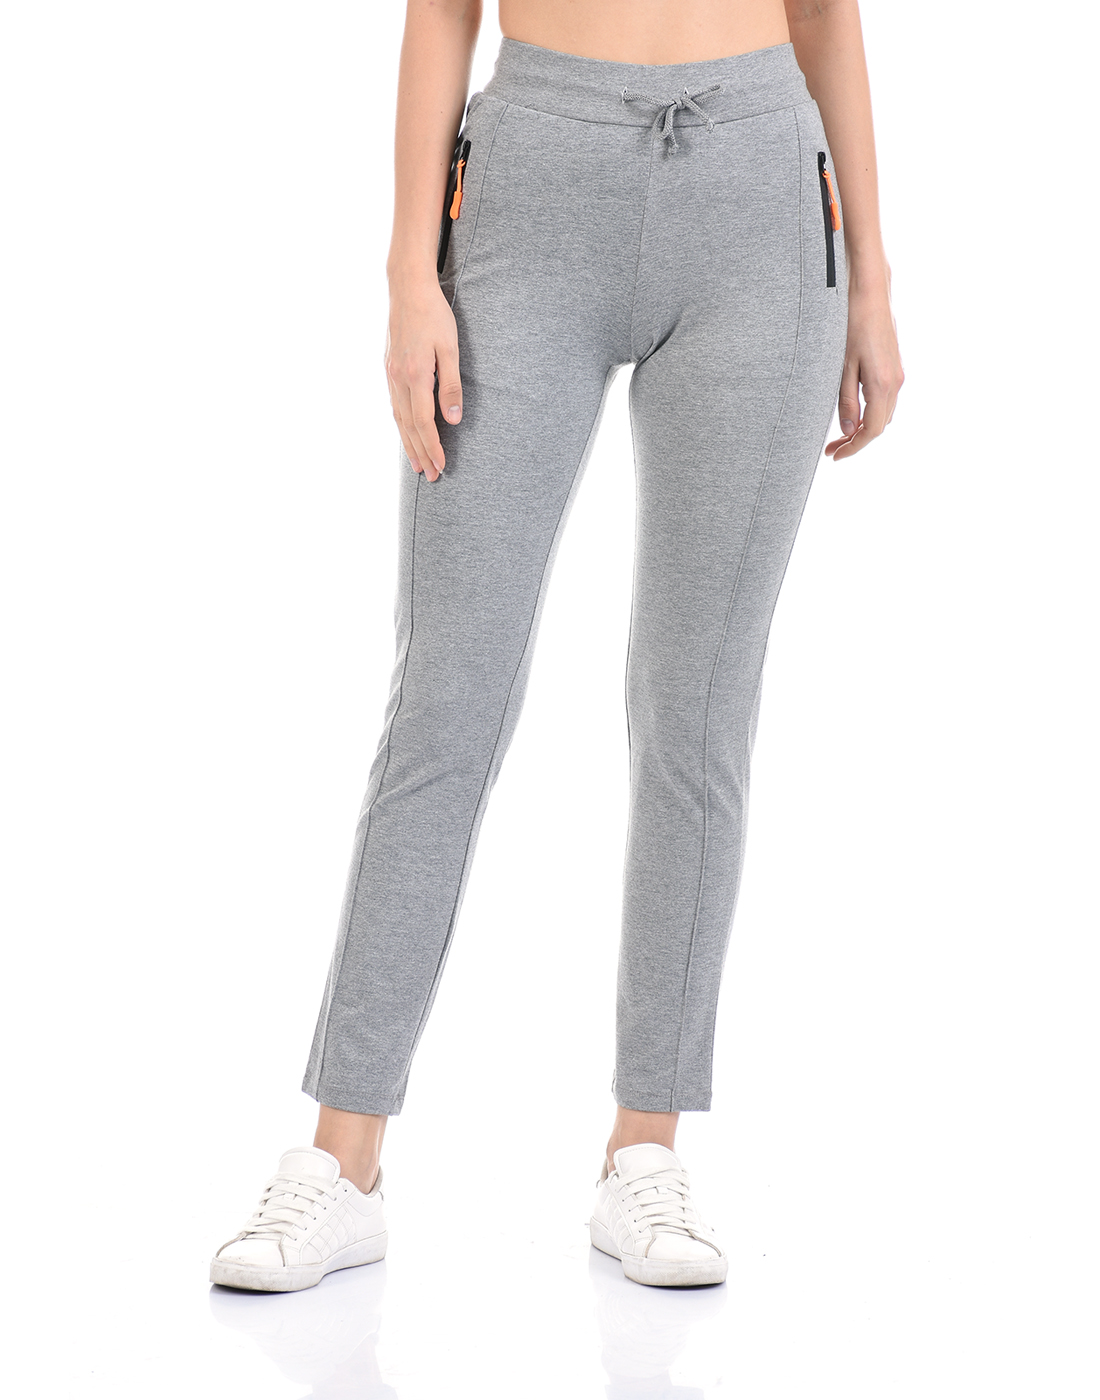 Buy spunk track pants for women in India @ Limeroad | page 3